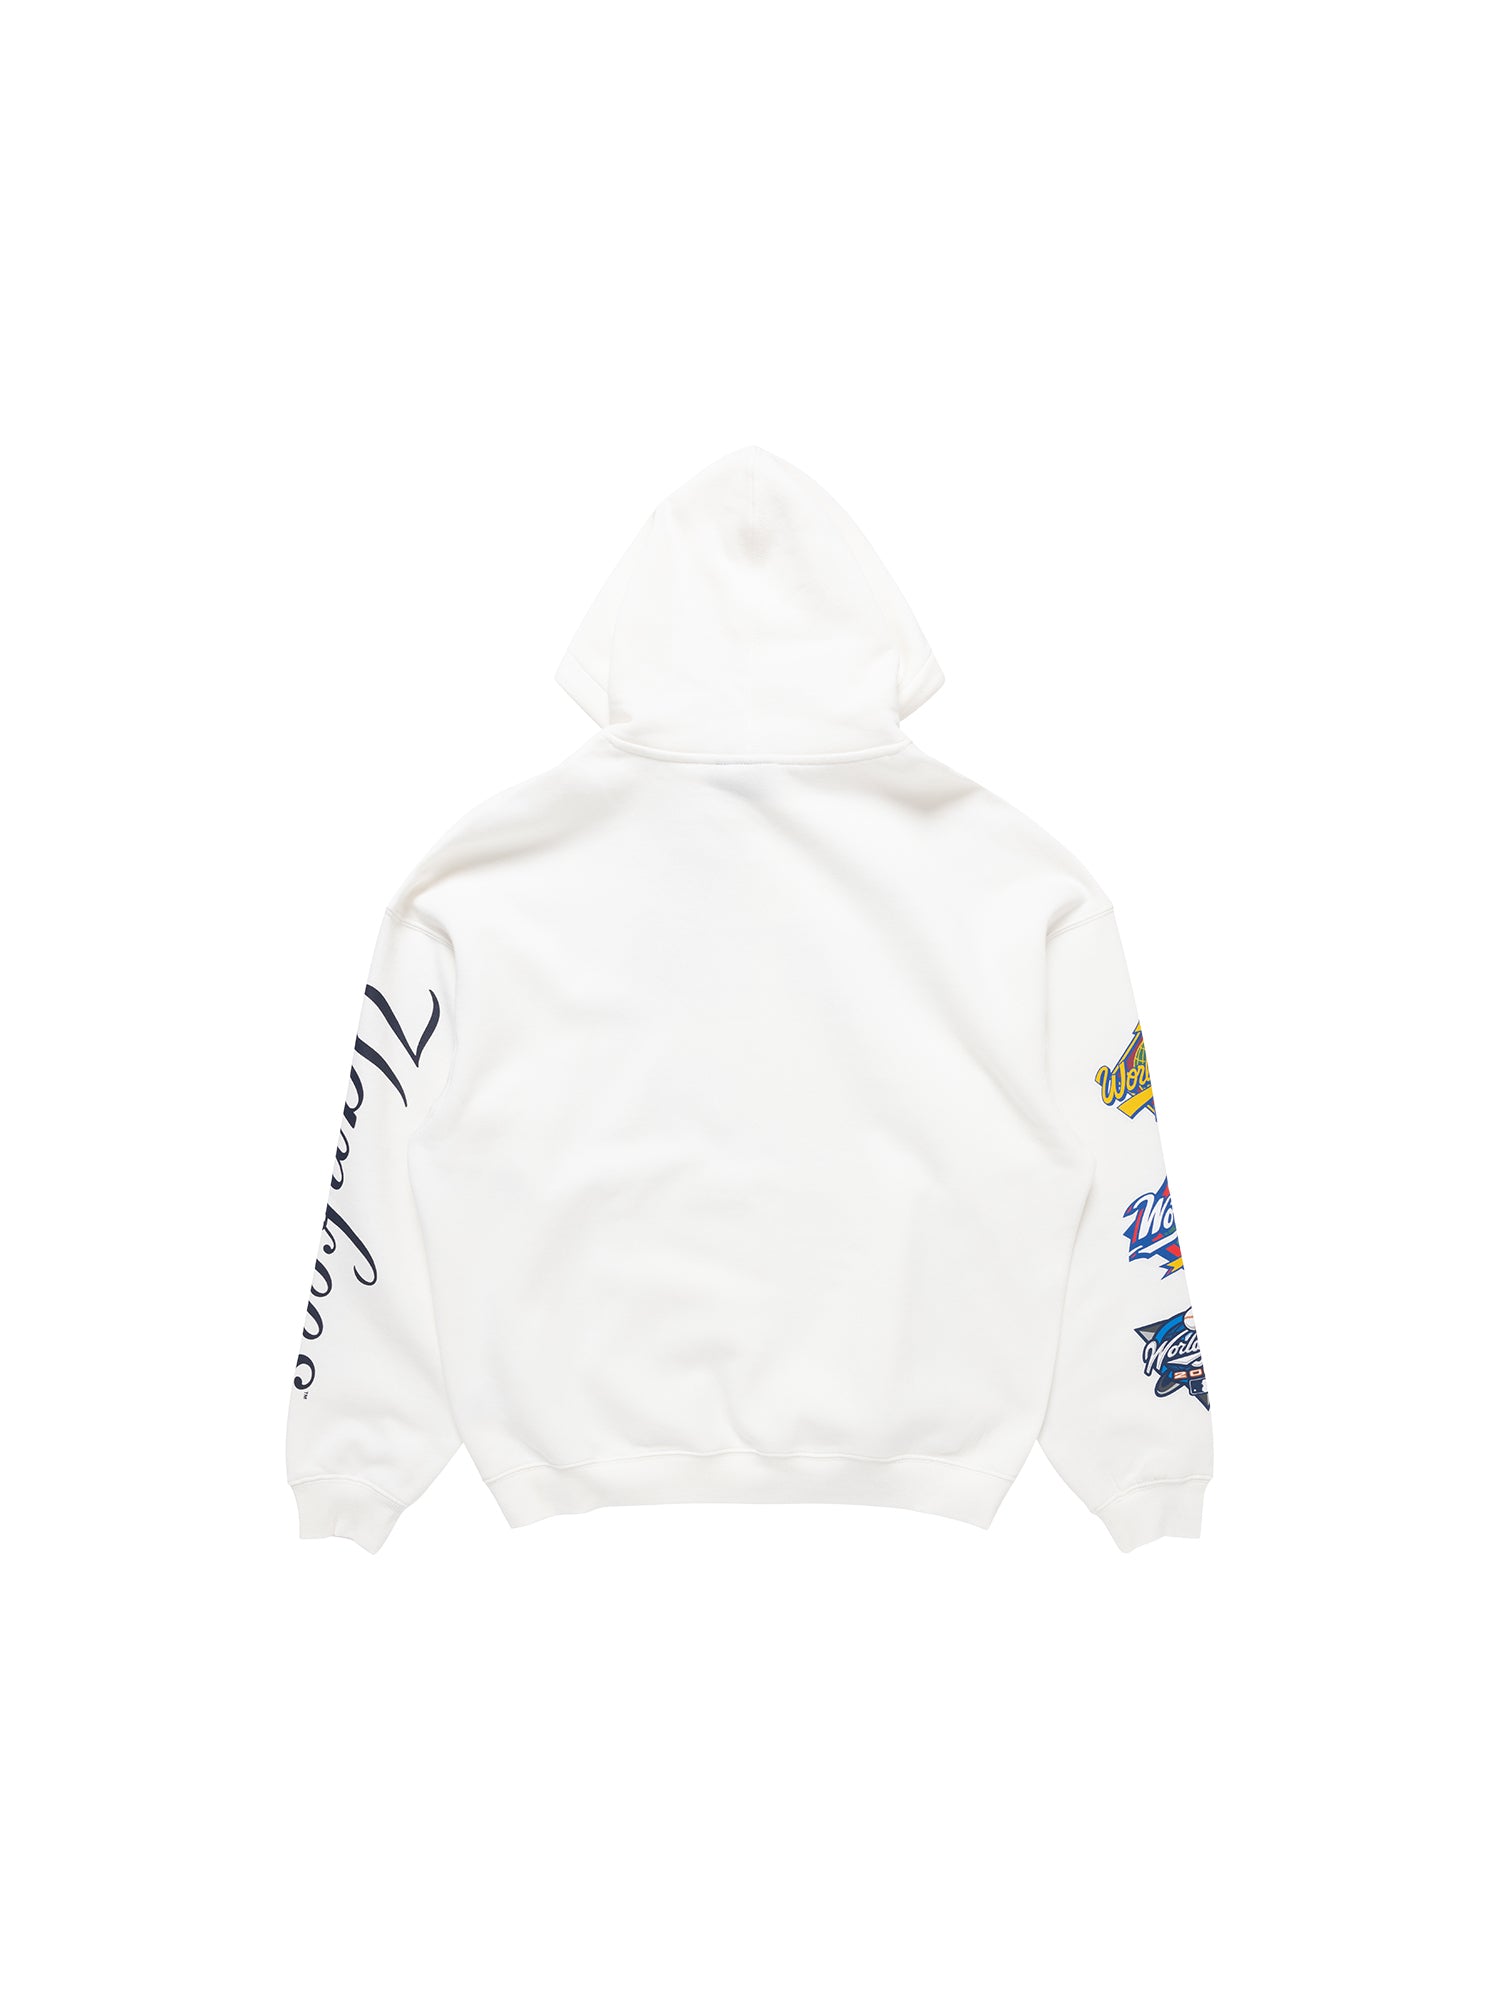 MJA-F11 (Majestic vintage sport oversize over the head hoodie yankees vintage white) 72396956 MAJESTIC